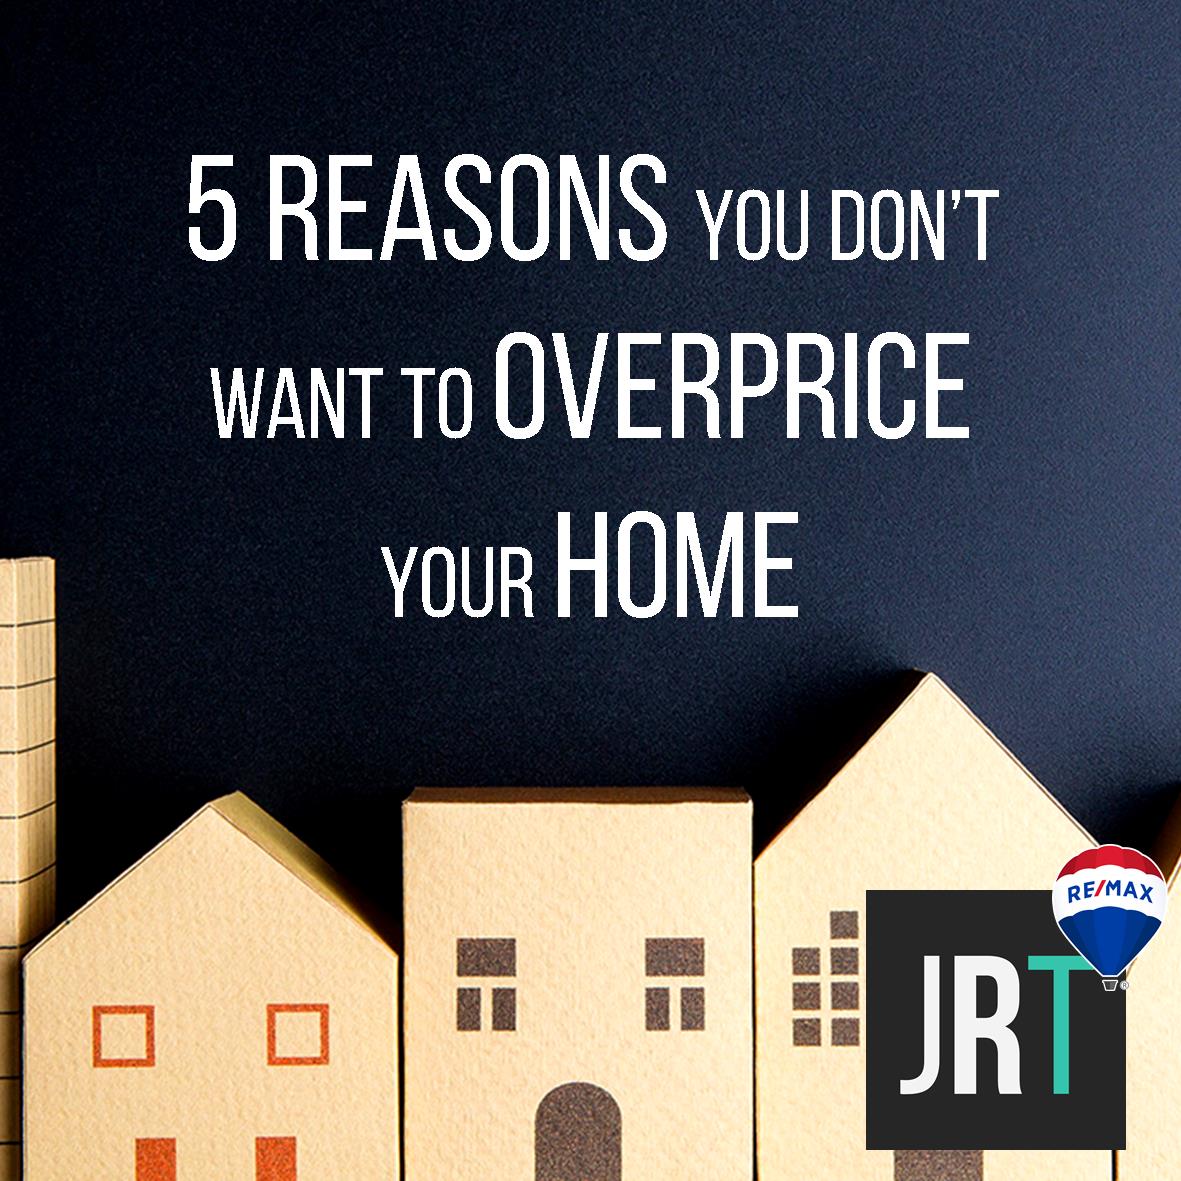 Don't Overprice Your Home